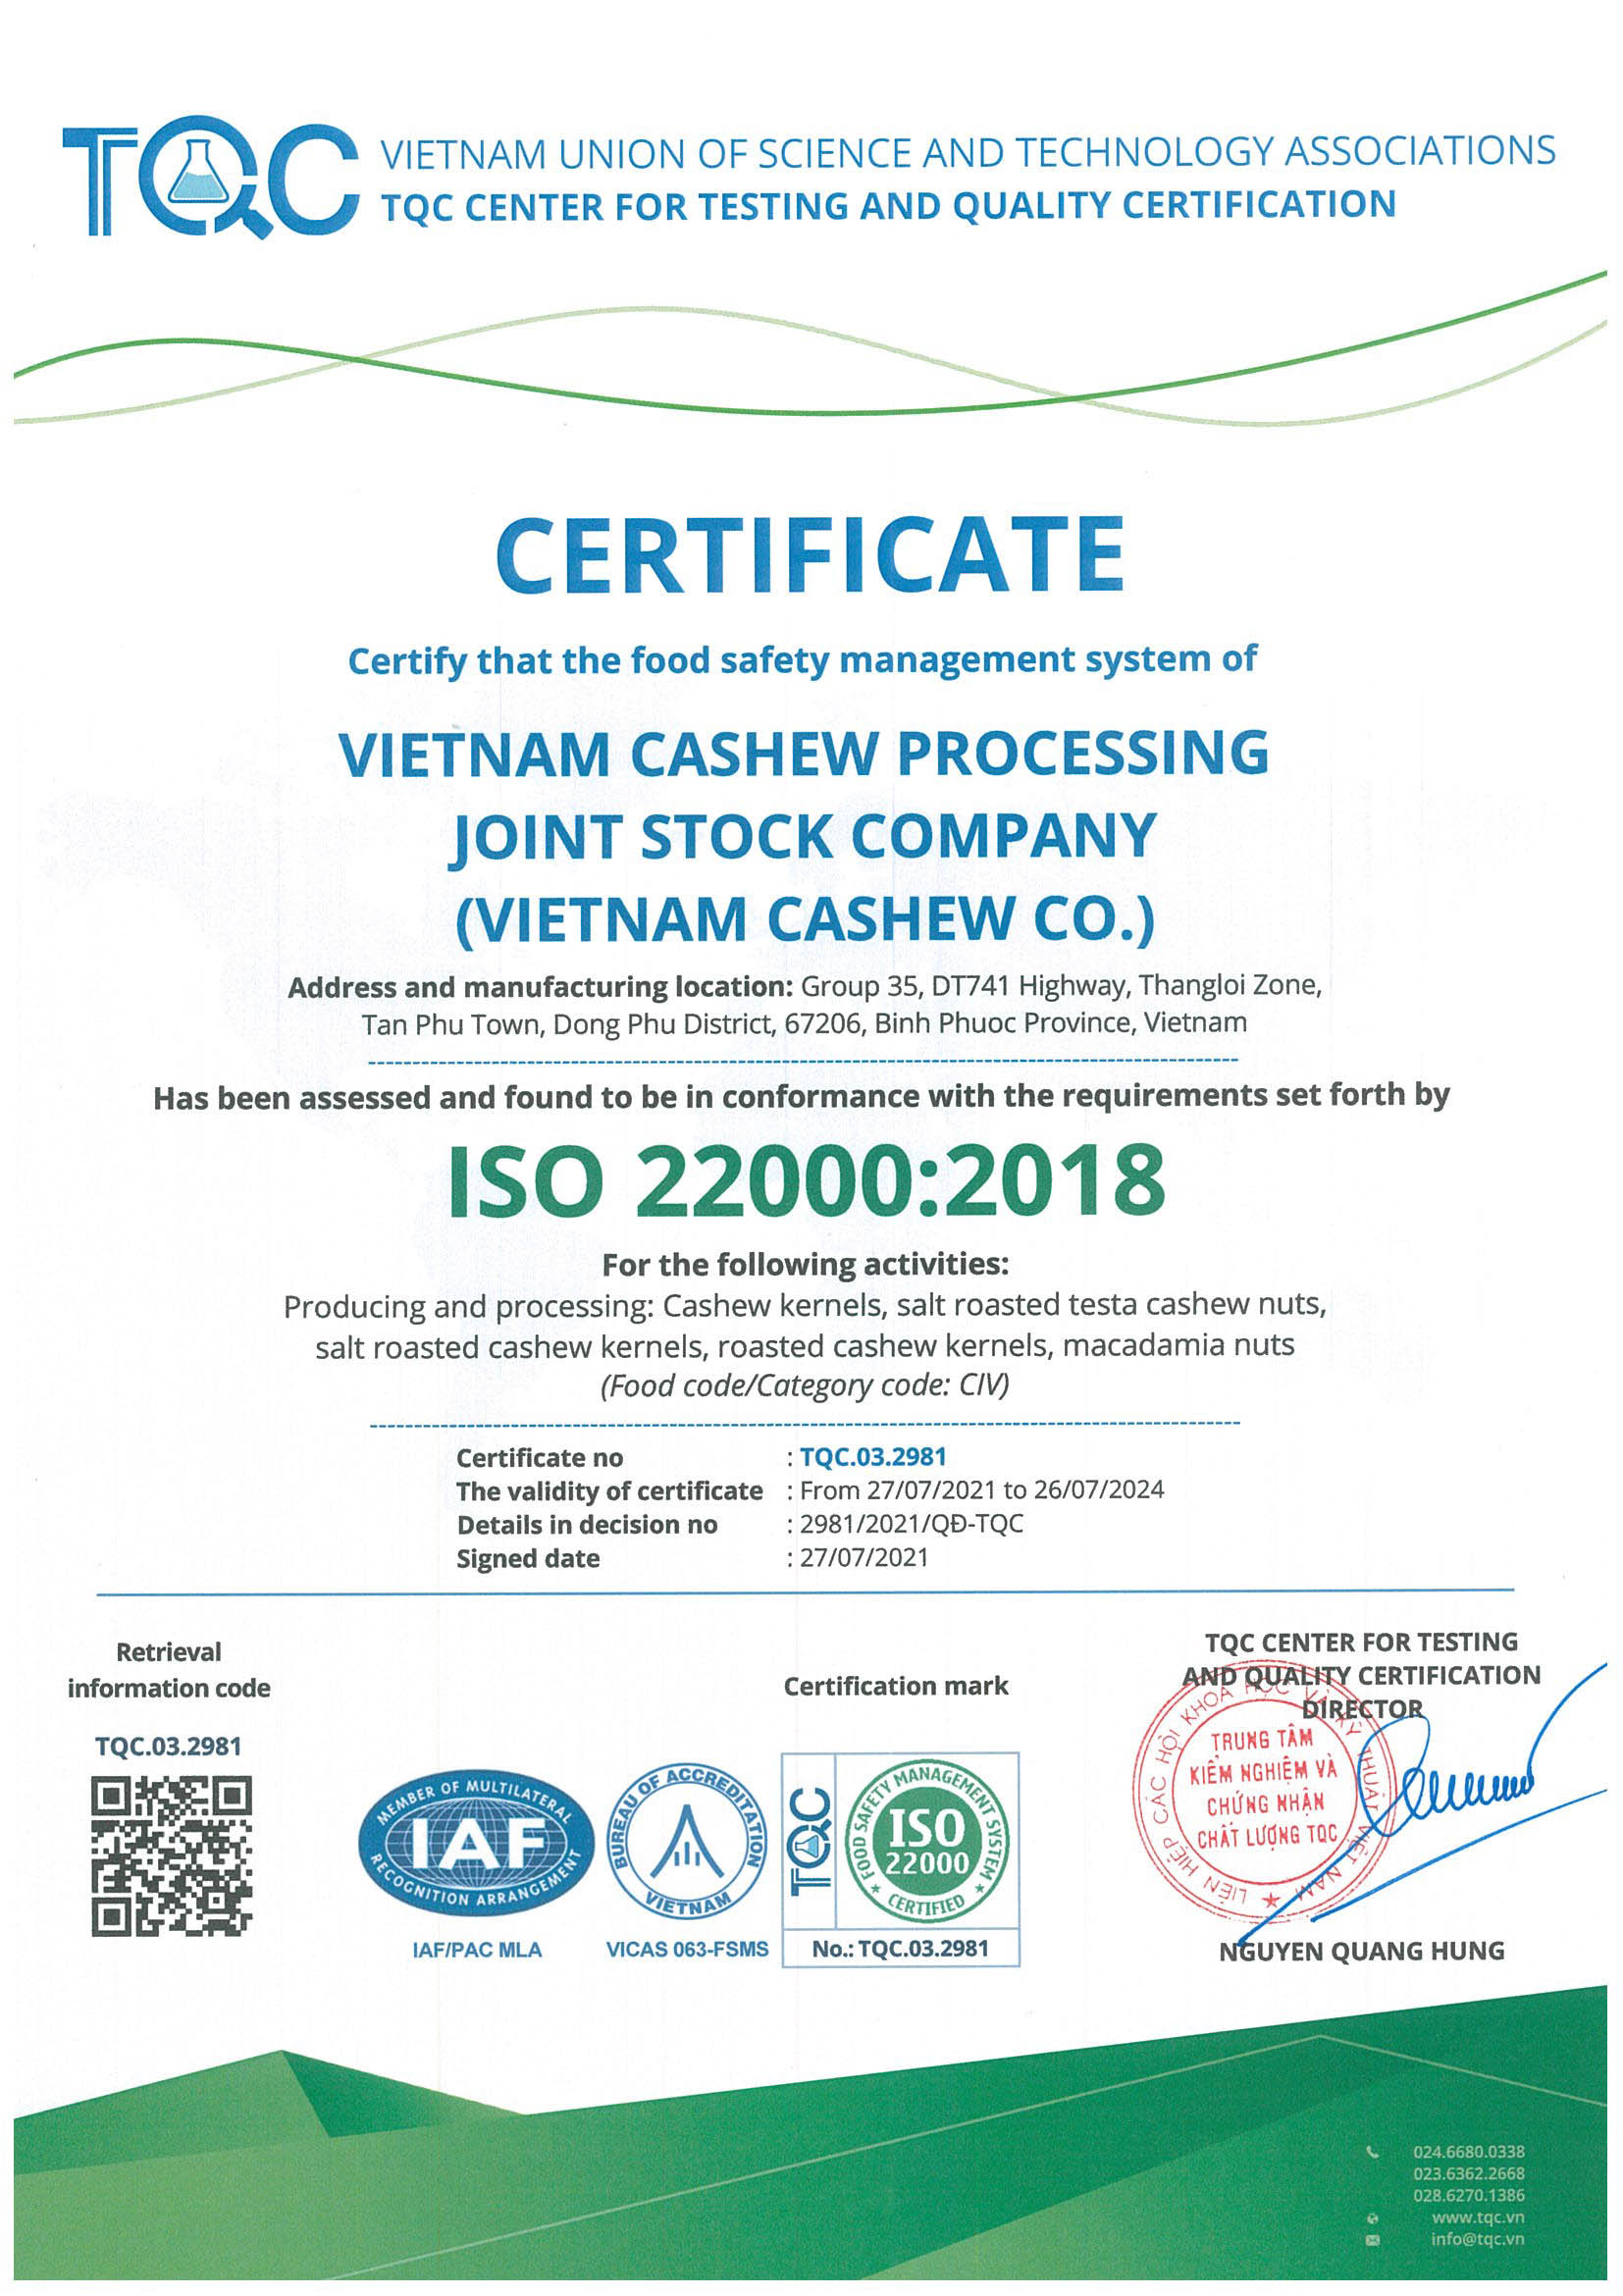 HACCP integrated ISO 22000 Certificate